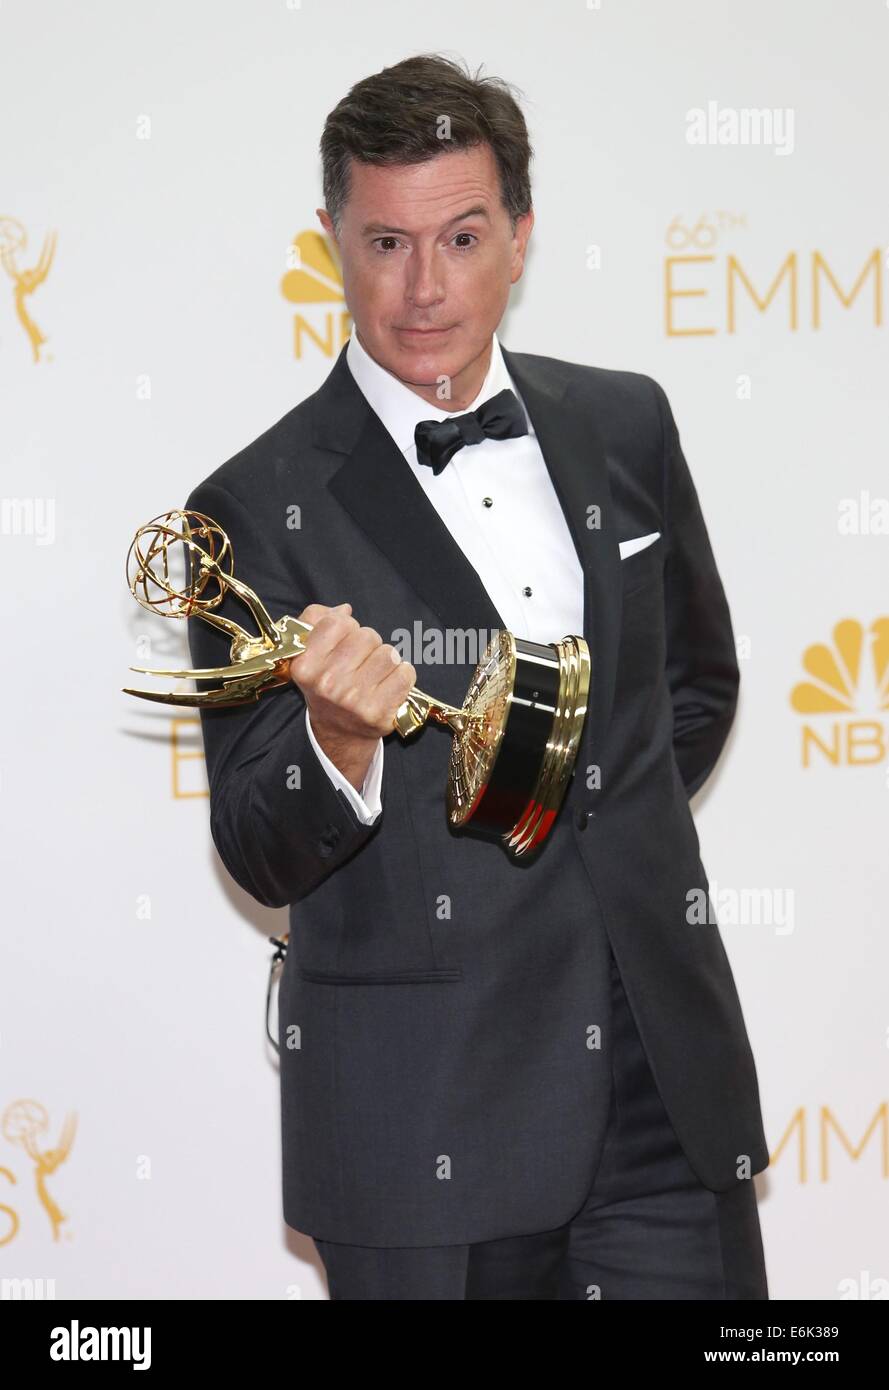 Los Angeles, CA, USA. 25th Aug, 2014. Stephen Colbert, Outstanding Variety, Music Or Comedy Series Winner and Outstanding Writing for a Variety Series, both for 'The Colbert Report', in the press room for The 66th Primetime Emmy Awards 2014 EMMYS - Press Room, Nokia Theatre L.A. LIVE, Los Angeles, CA August 25, 2014. Credit:  James Atoa/Everett Collection/Alamy Live News Stock Photo